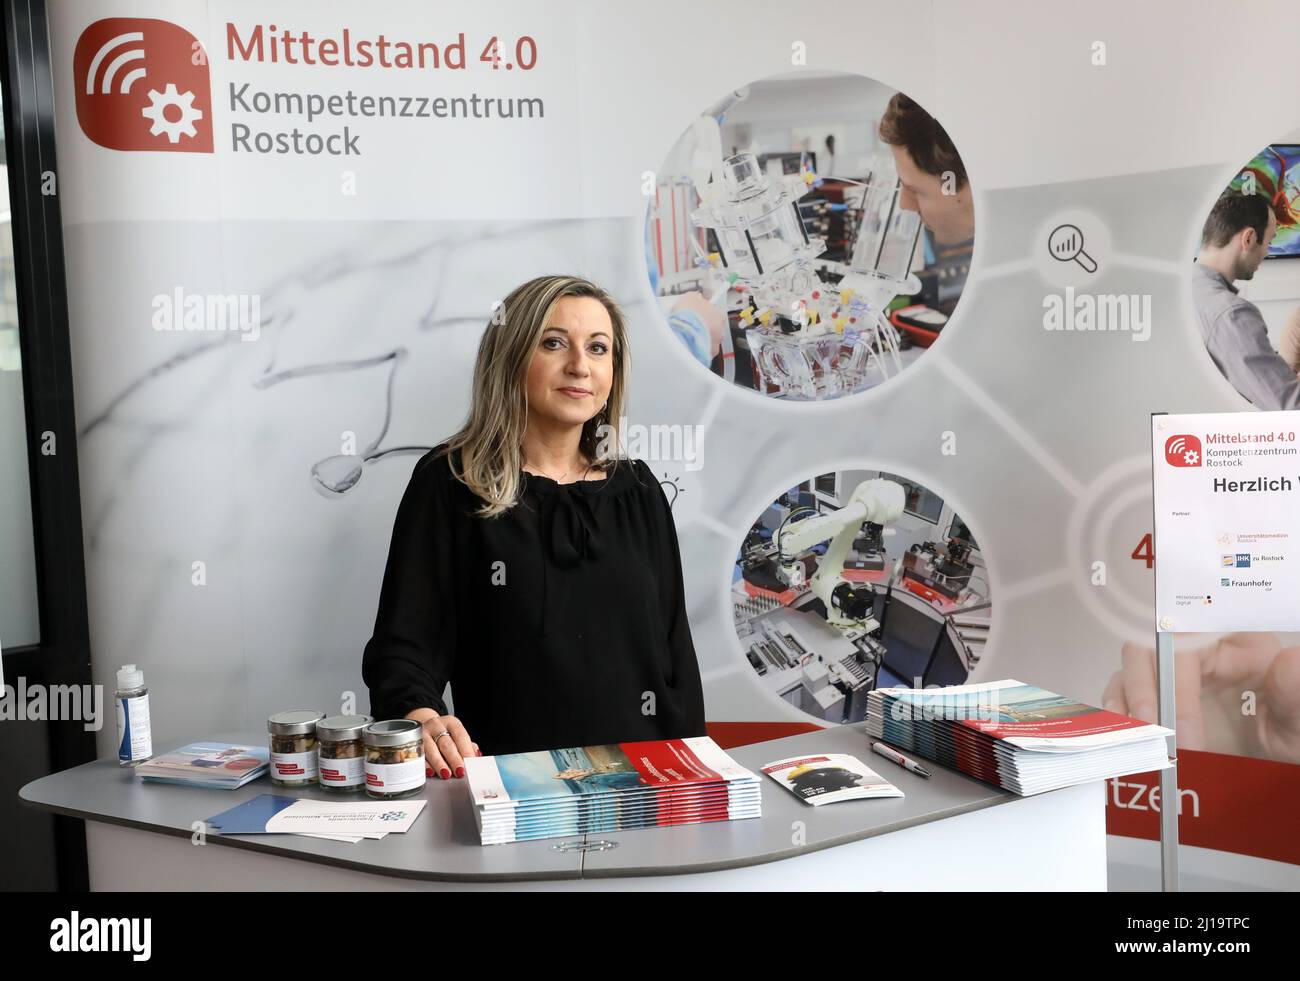 Rostock, Germany. 17th Mar, 2022. Silvia Rydlewicz, project manager, at the headquarters of the Mittelstand 4.0 Competence Center at Deutsche Med. A year ago, the Competence Center received funding of more than three million euros for two years. The center's experts accompany small and medium-sized enterprises from Mecklenburg-Vorpommern, such as medical practices, tourist facilities or production companies, in all areas of digitization. Credit: Bernd Wüstneck/dpa-Zentralbild/dpa/Alamy Live News Stock Photo